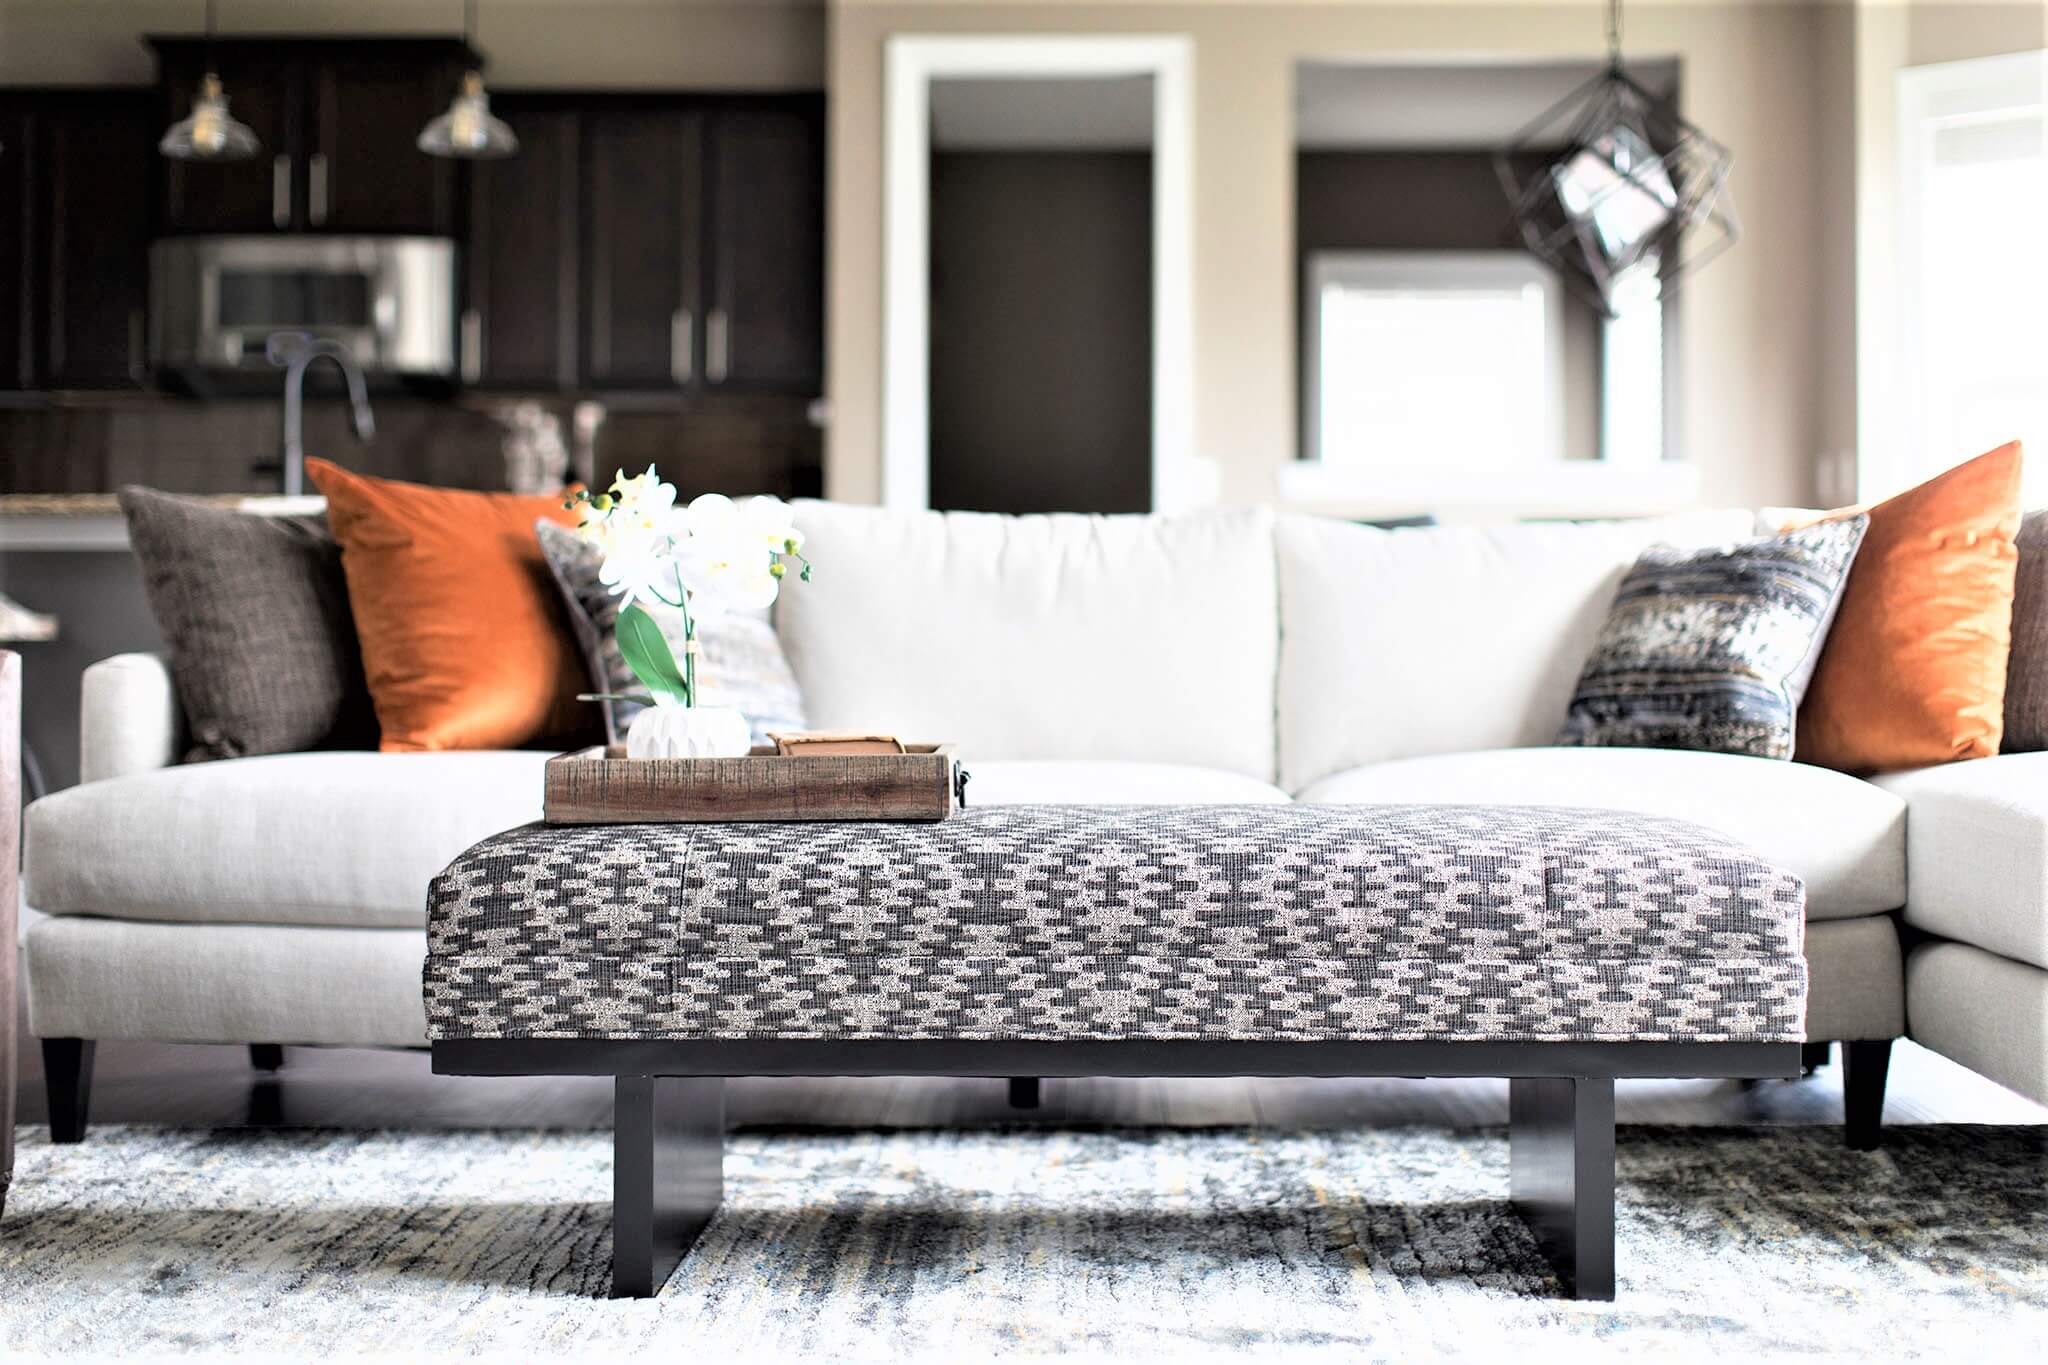 This ottoman doubles as a coffee table. Just add a tray for drinks!